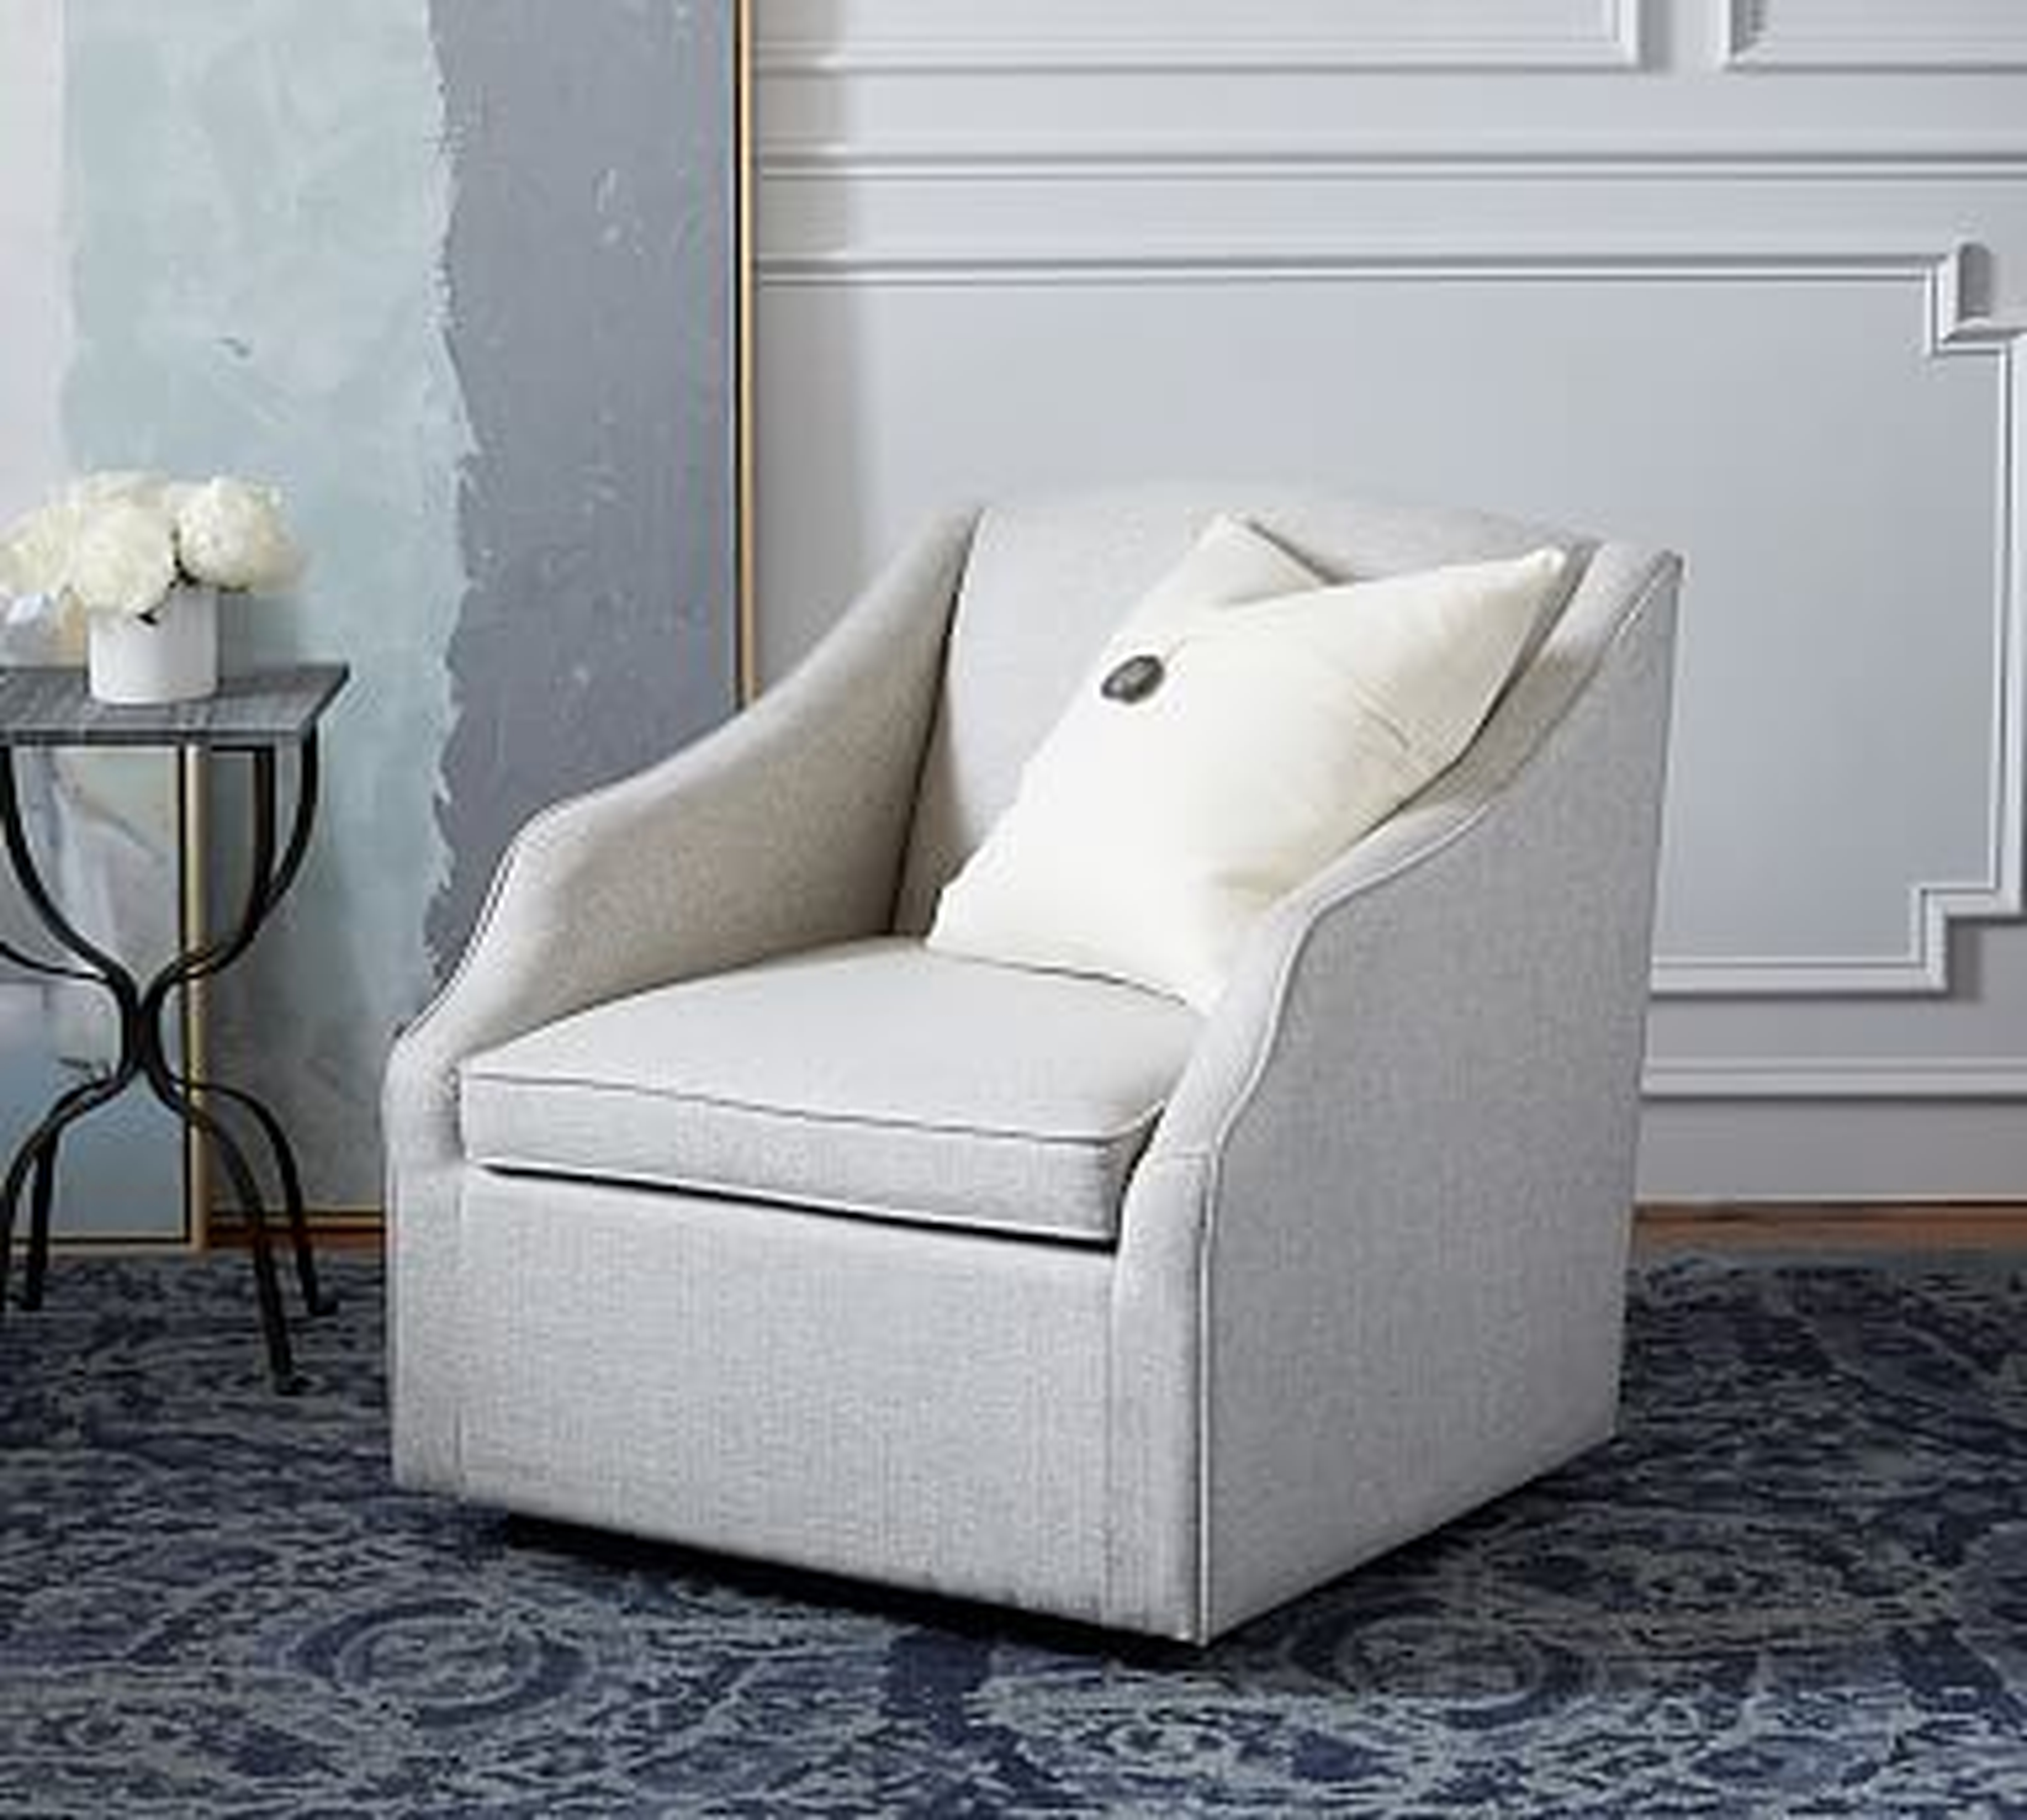 SoMa Emma Upholstered Swivel Armchair, Polyester Wrapped Cushions, Heathered Twill Stone - Pottery Barn